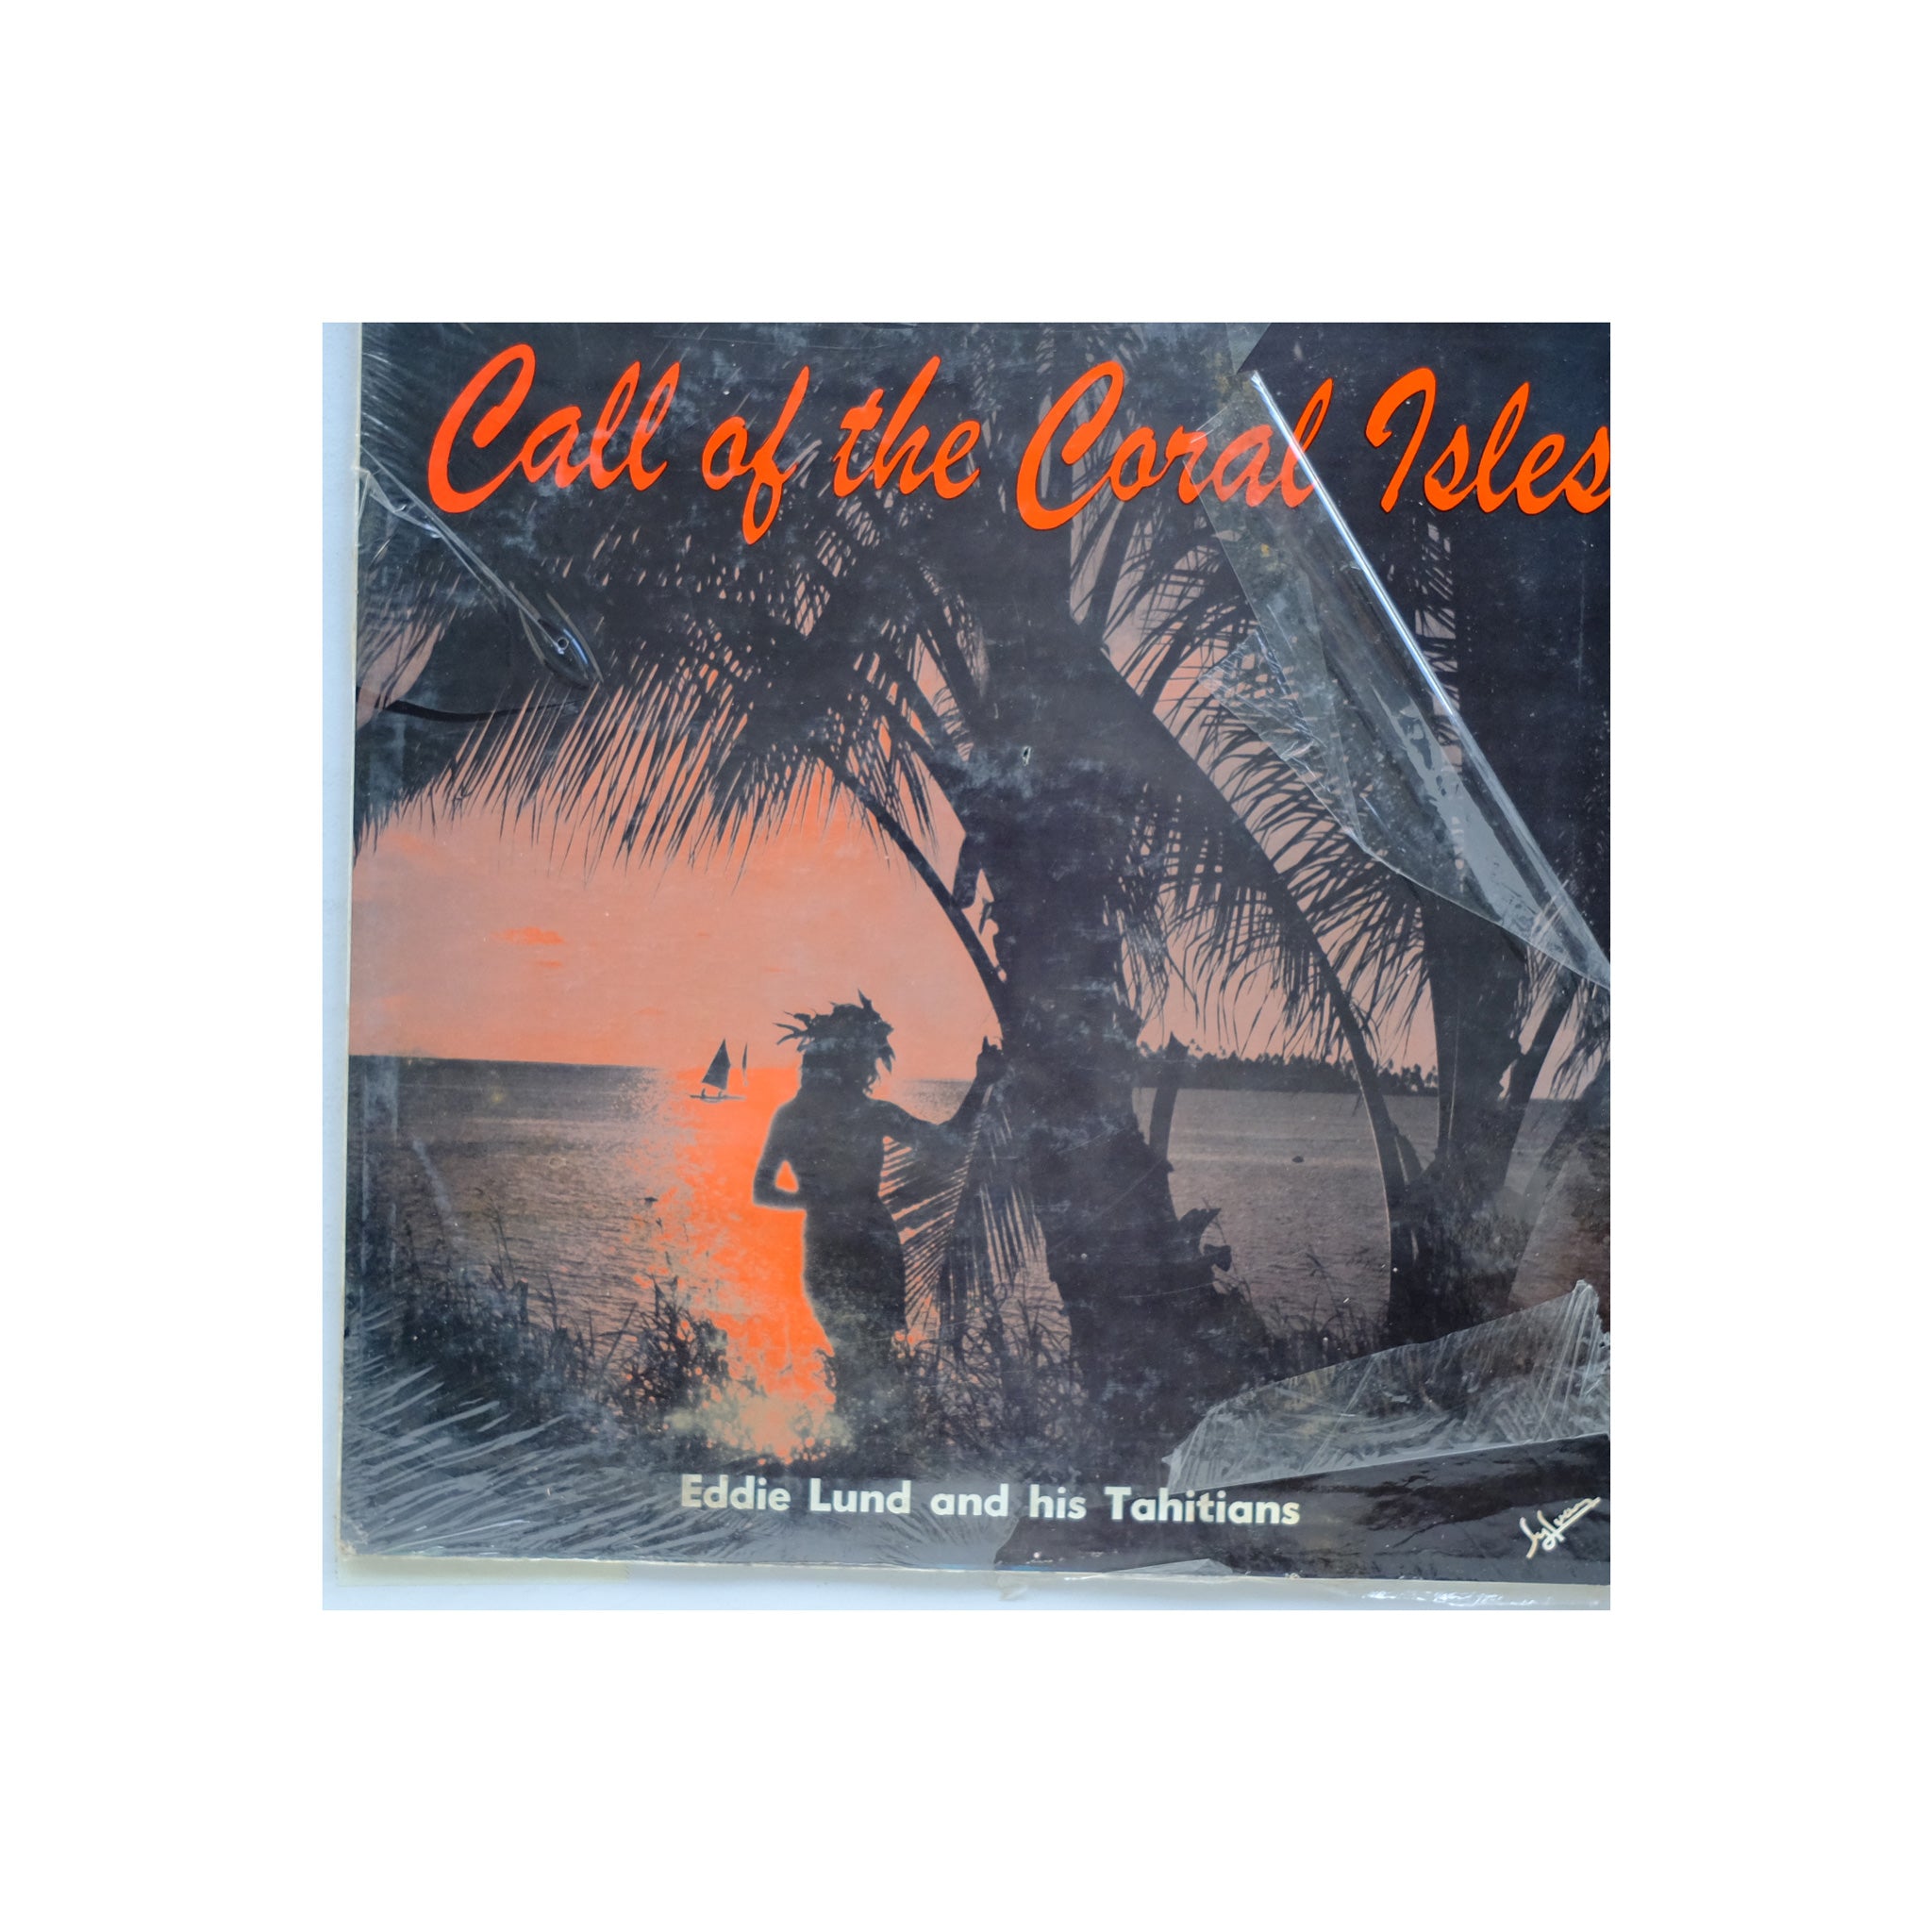 Eddie Lund & His Tahitians - Call of the Coral Isles